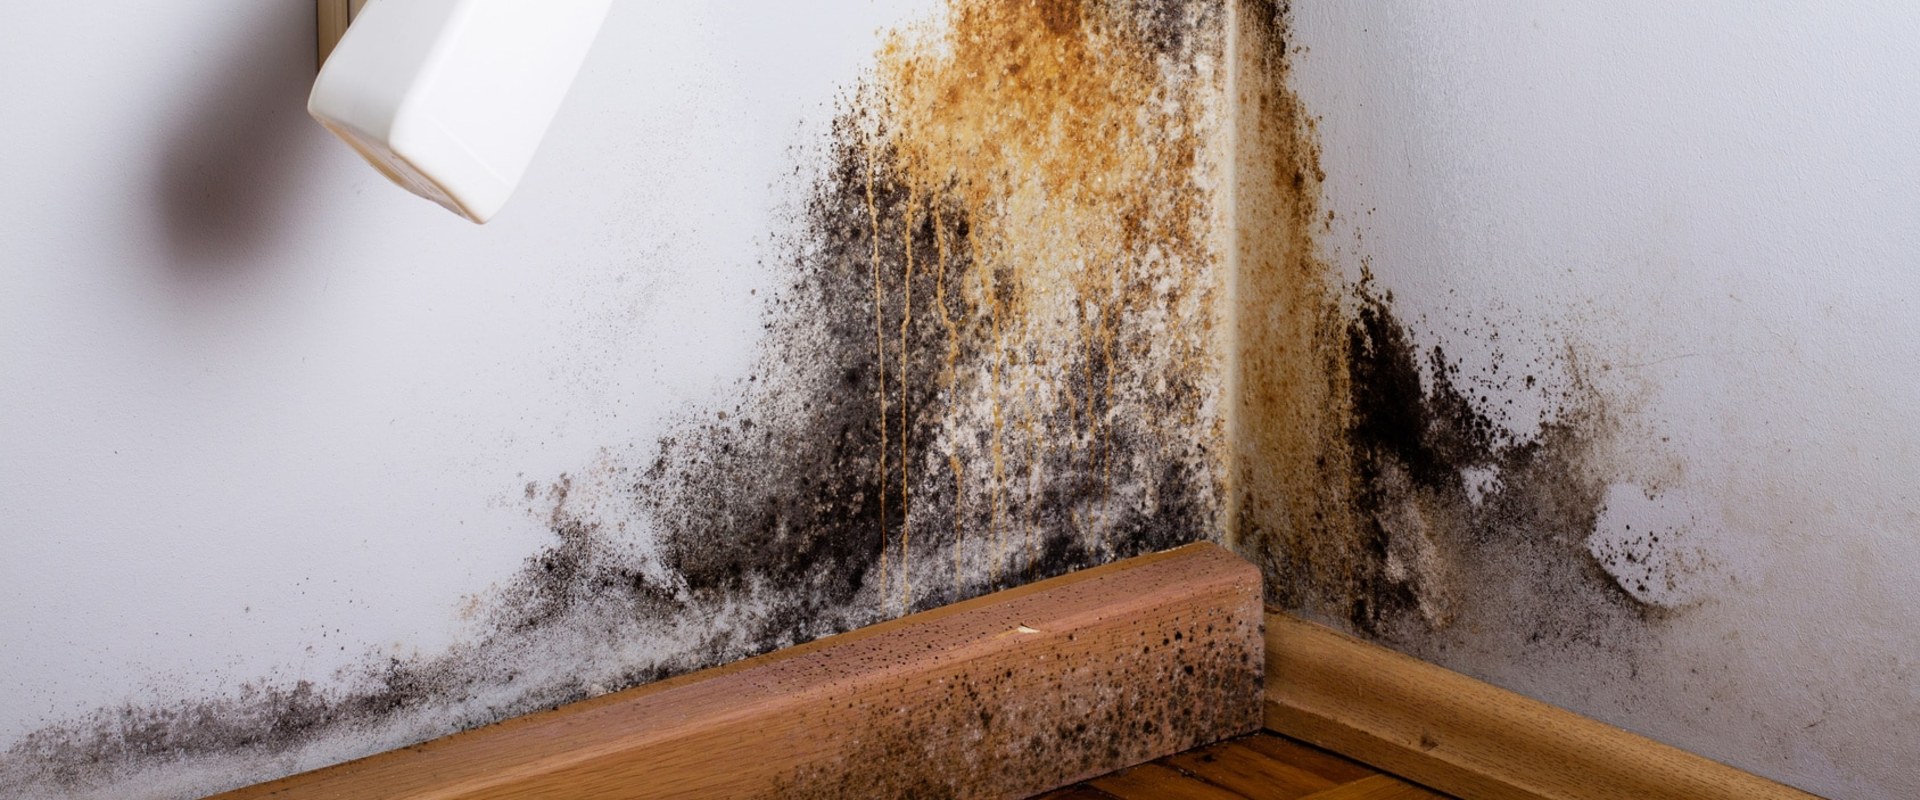 Why Does Mold Keep Coming Back After Cleaning?